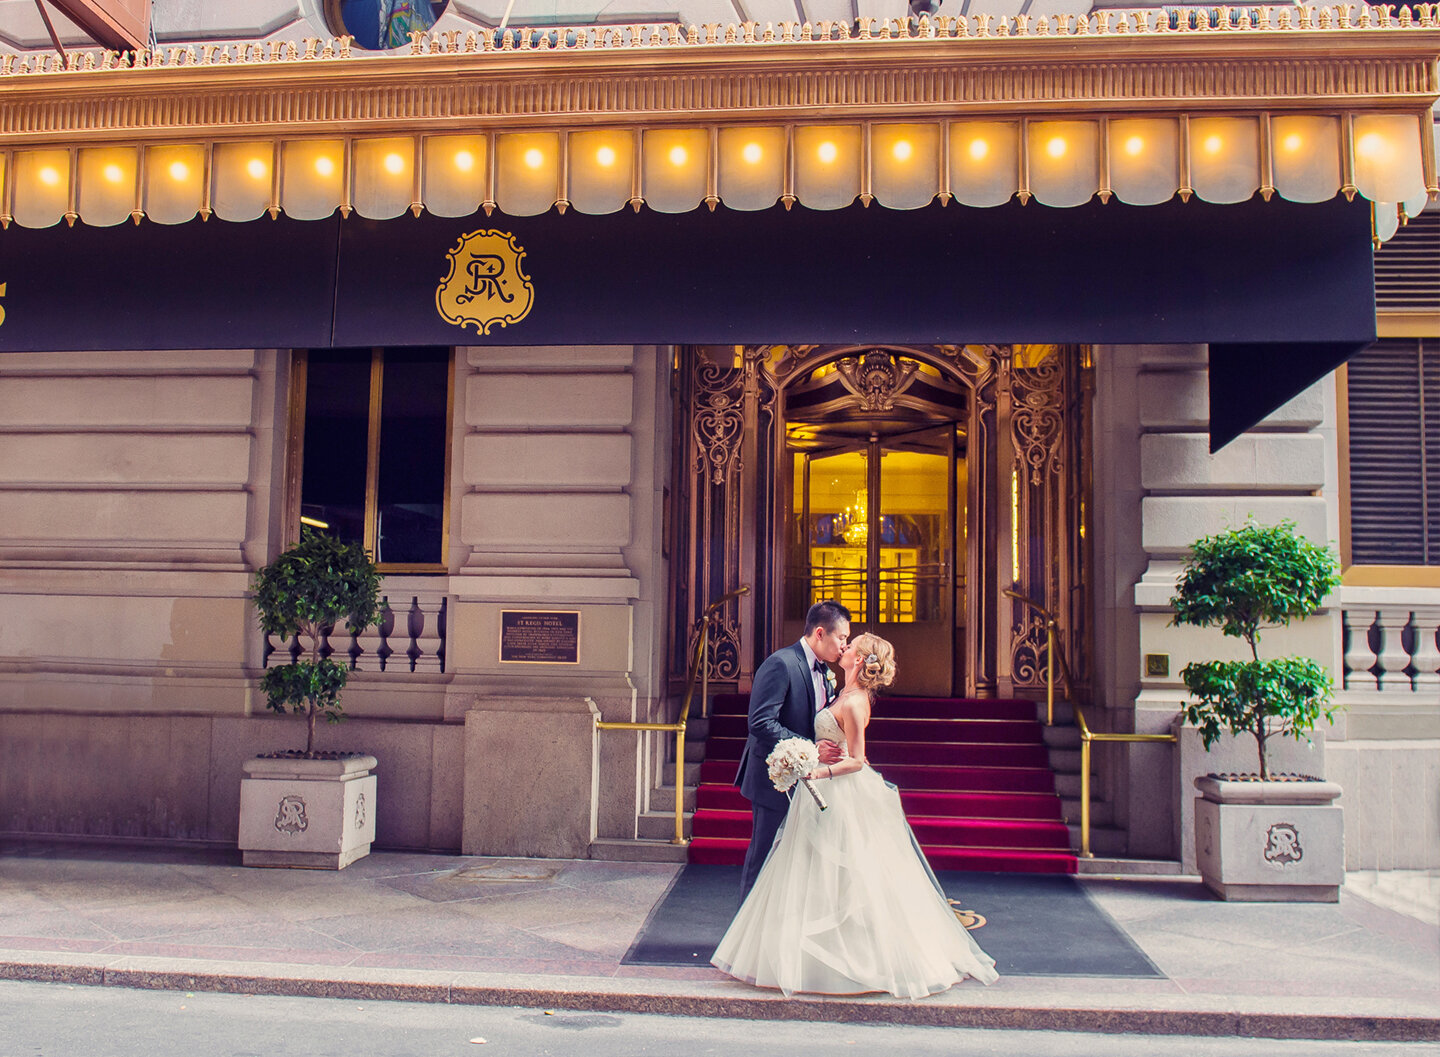 The bride and the groom outside St. Regis Hotel